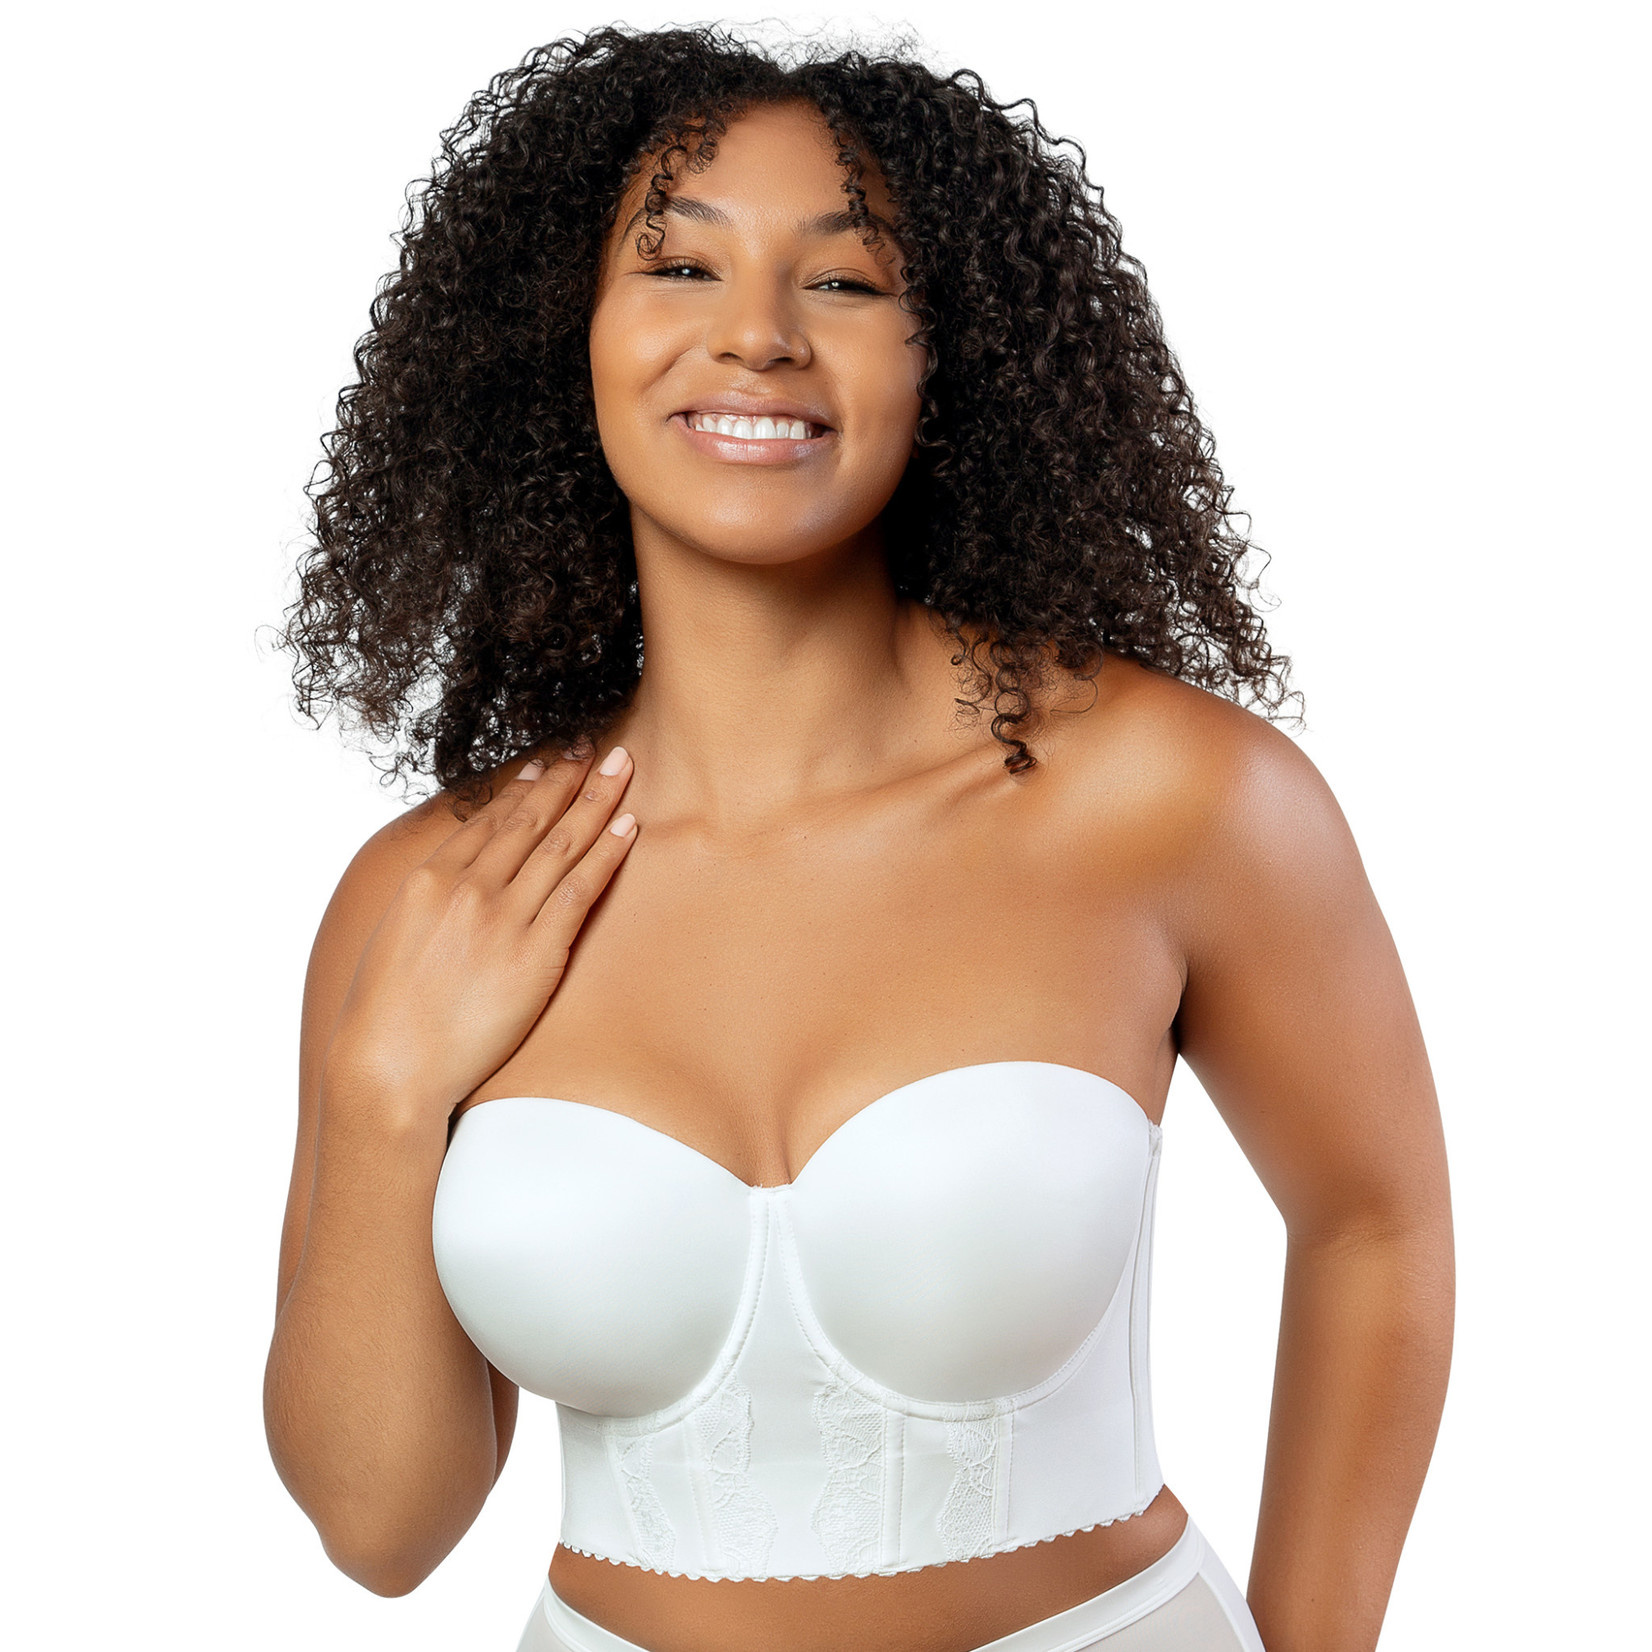 How to Find the Perfect Strapless Bra for Large Breasts? - Lucy's